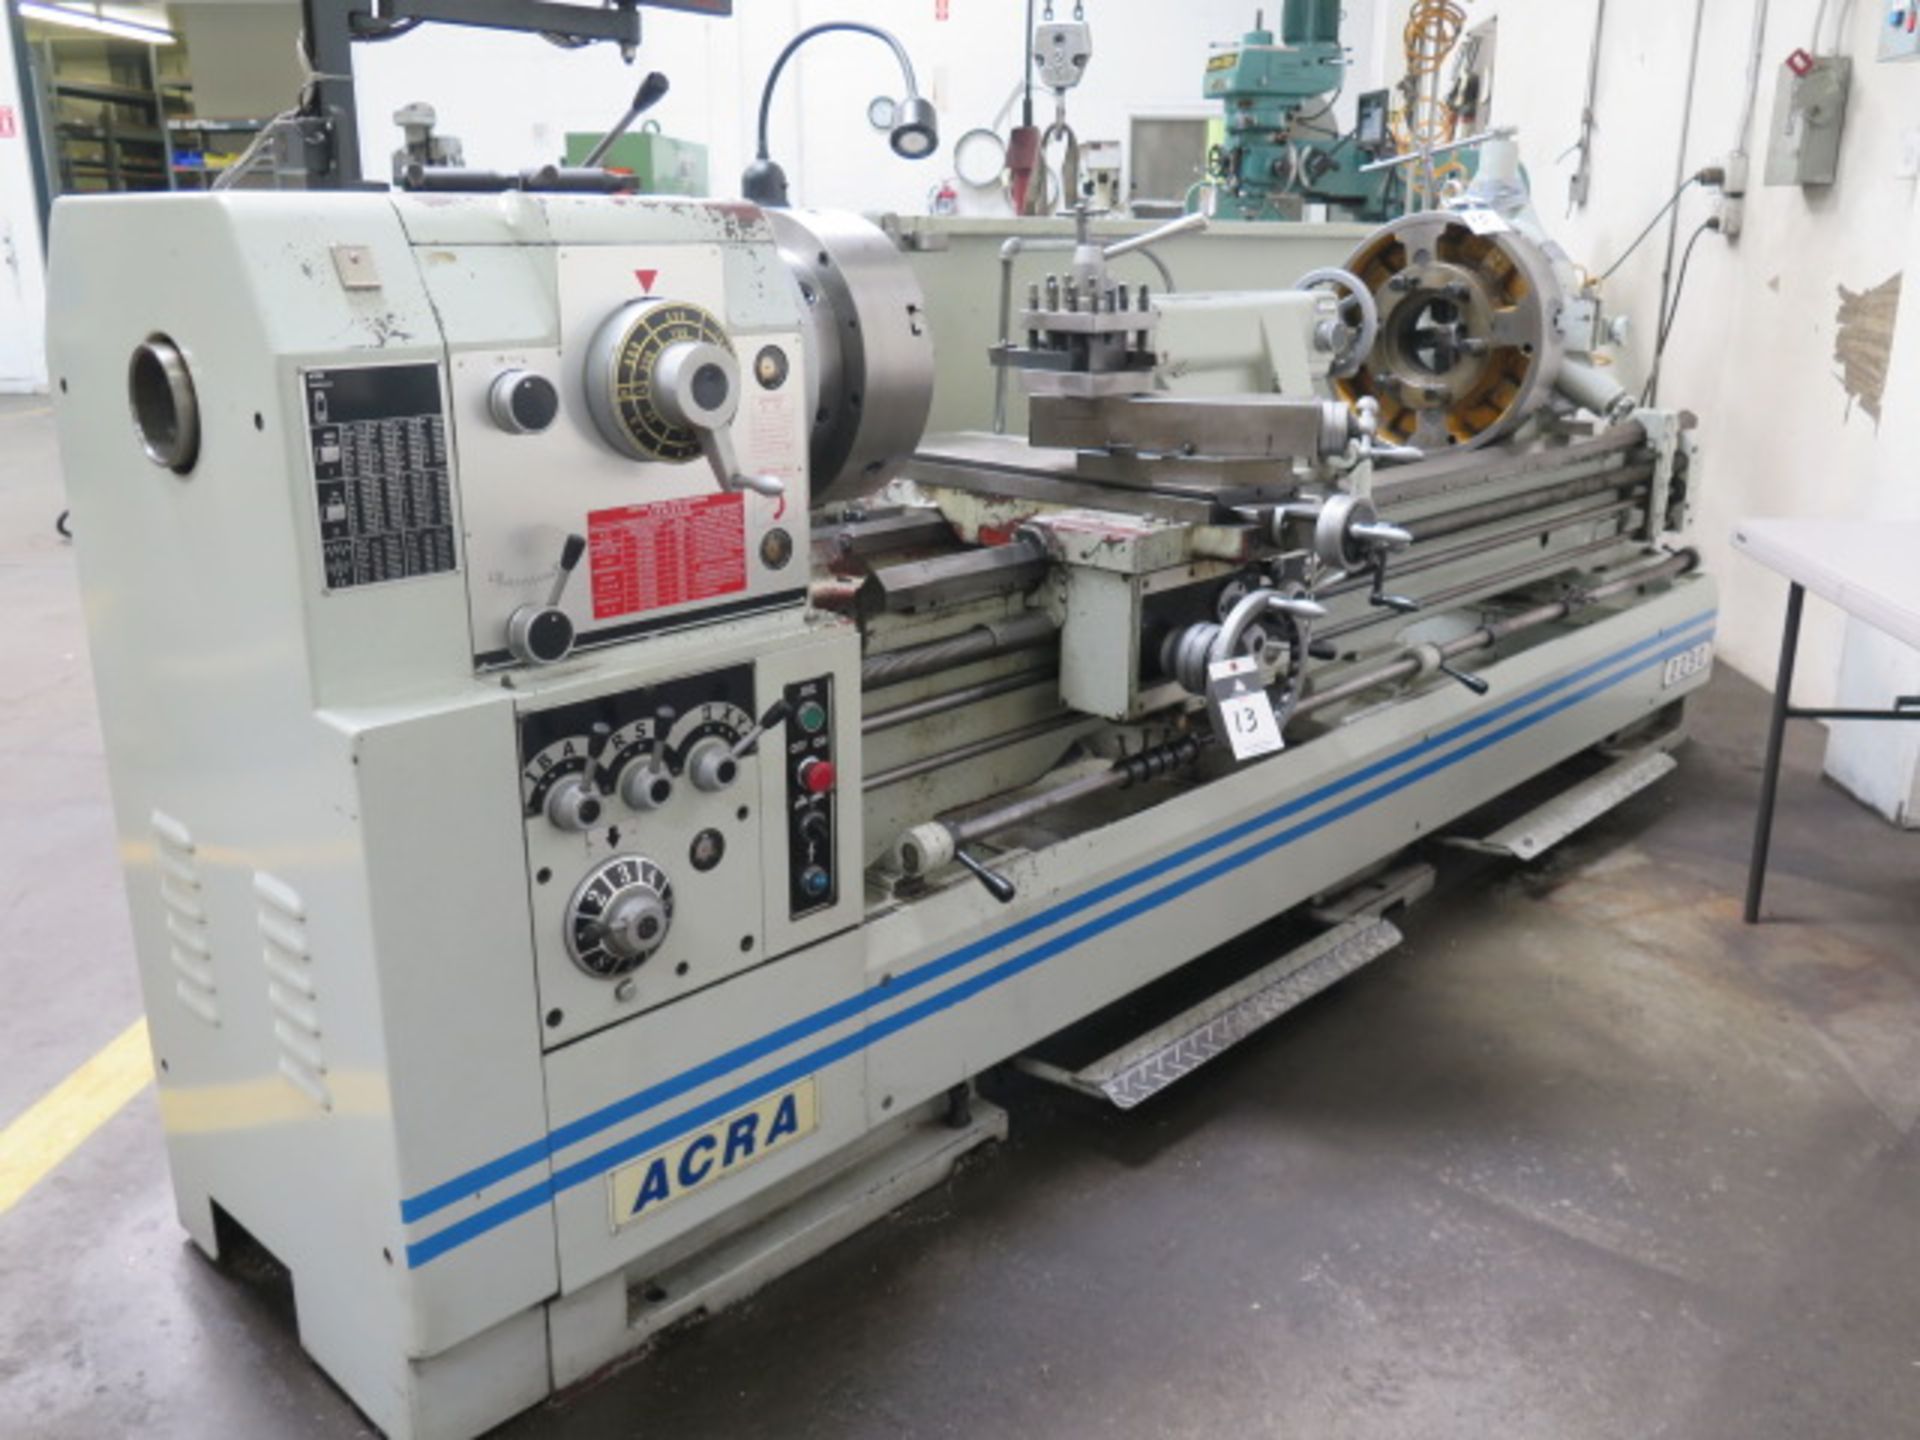 2009 Acra 2290 22" x 90" Geared Head Gap Bed Lathe s/n CH08984 w/ Newall DP700 Programmable DRO, - Image 2 of 12